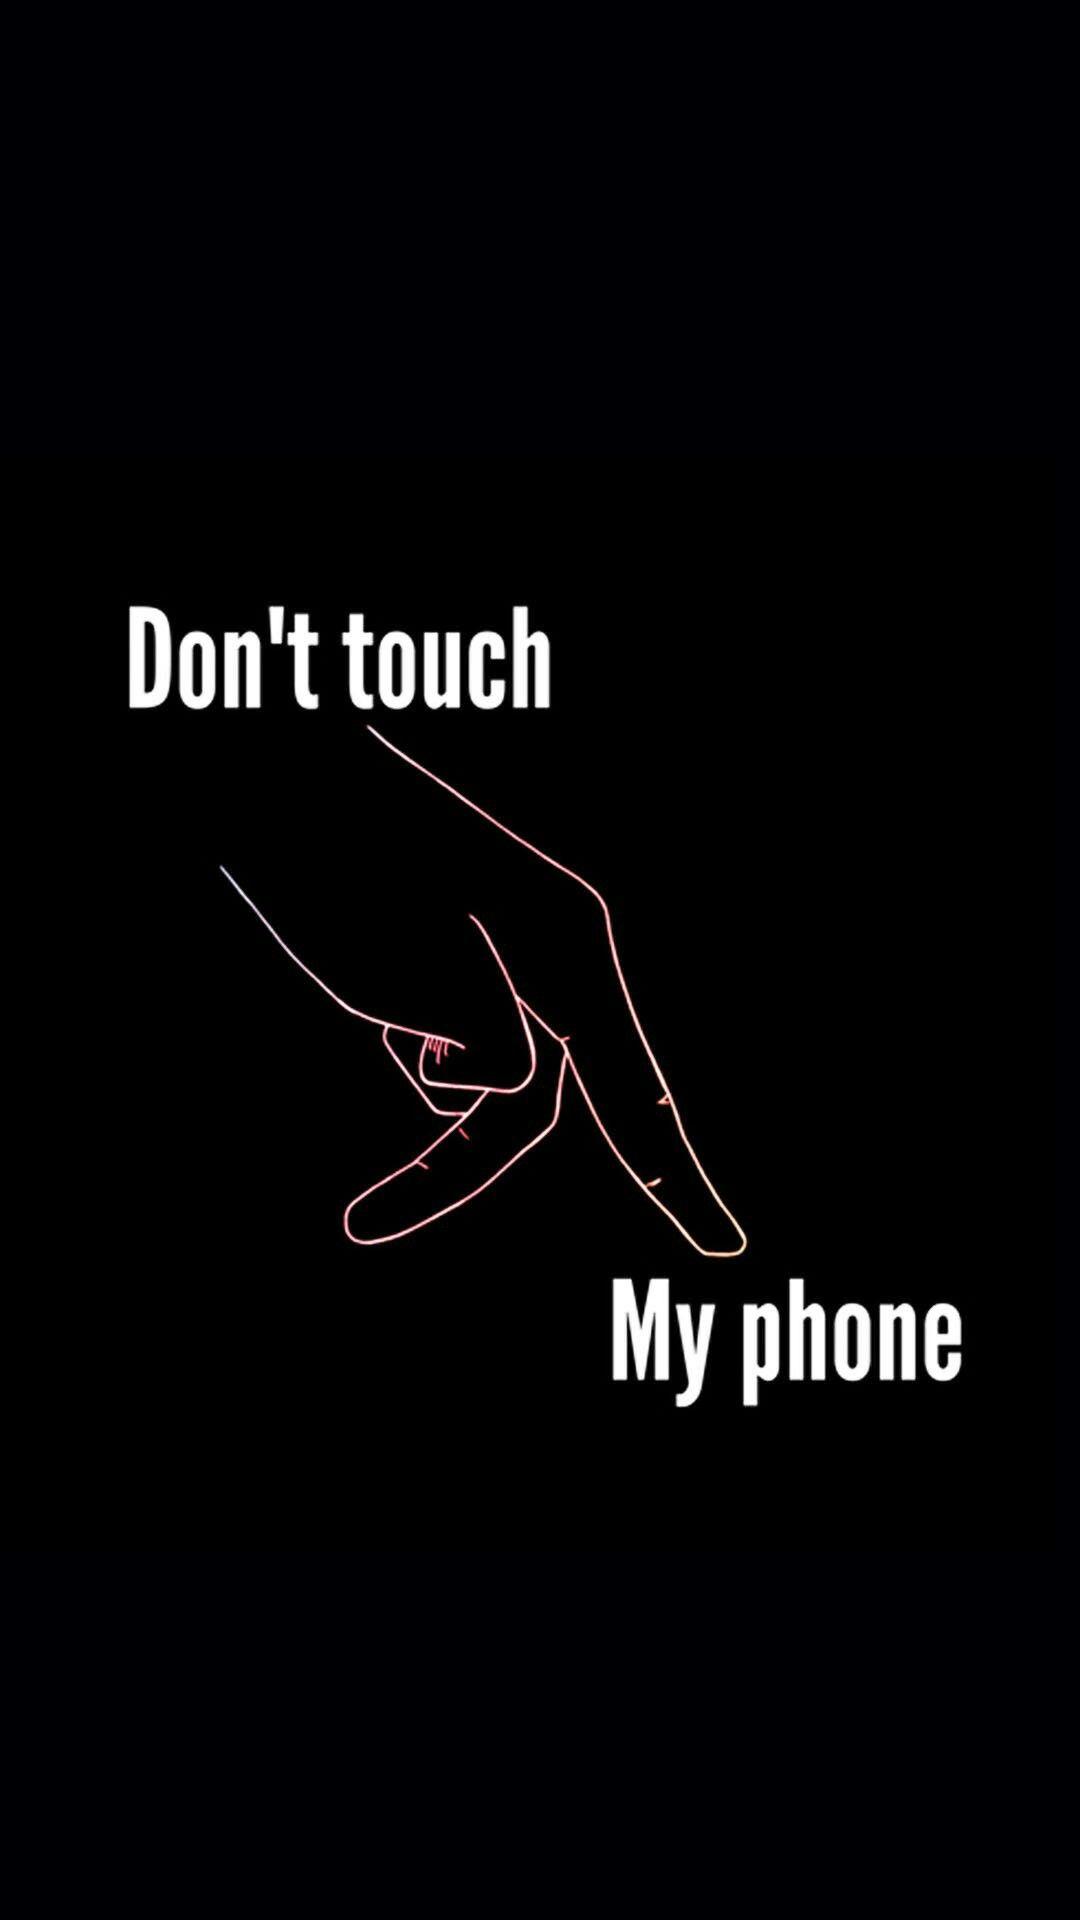 Don't touch my phone wallpaper. Dont touch my phone